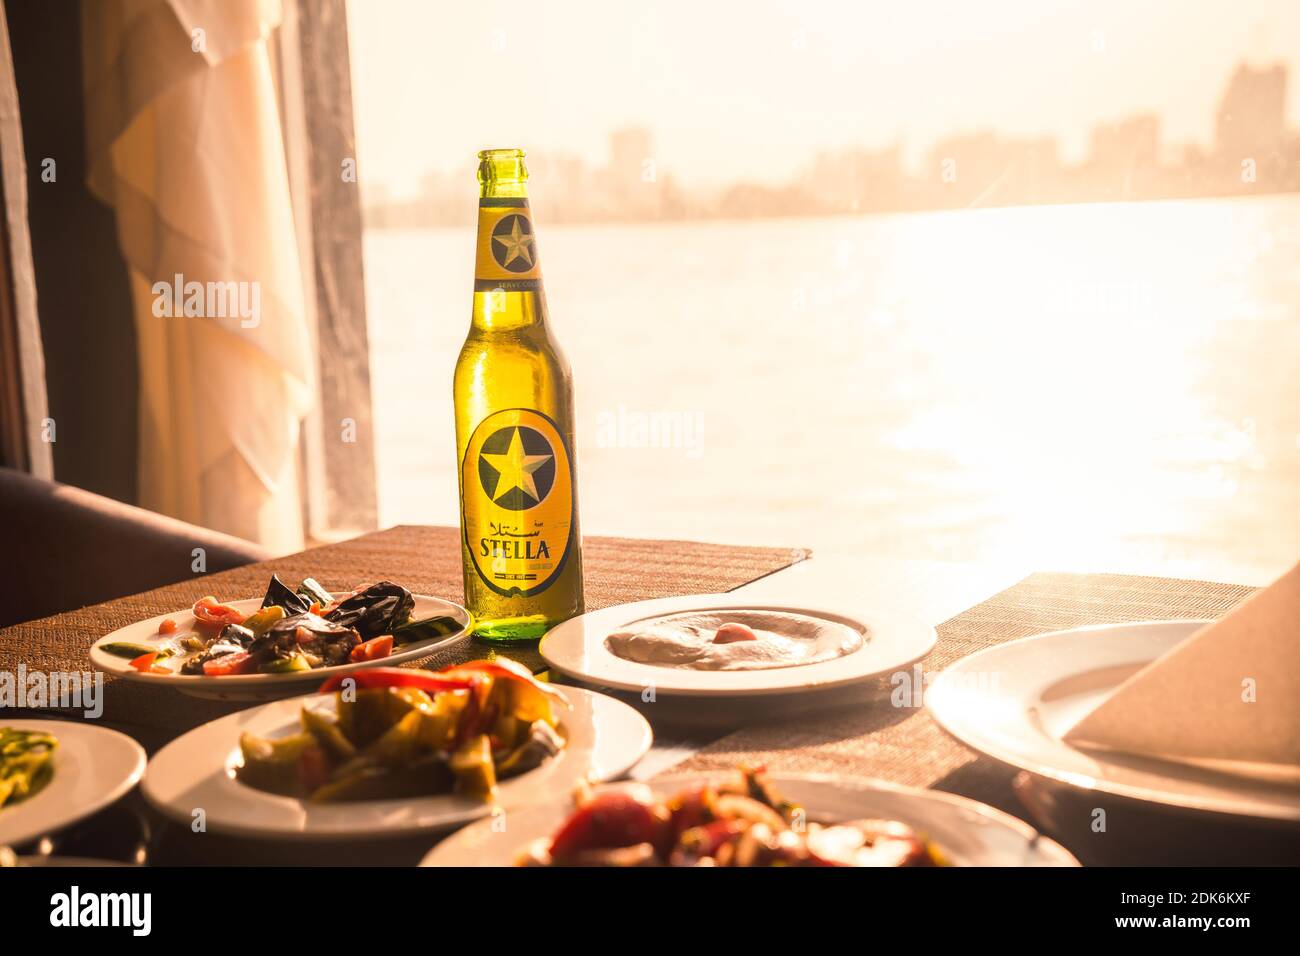 CAIRO, EGYPT - Oct 09, 2020: Cairo, Egypt; October 2020: A traditional dinner of the country accompanied by a Stella, local beer at the sunset of the Stock Photo